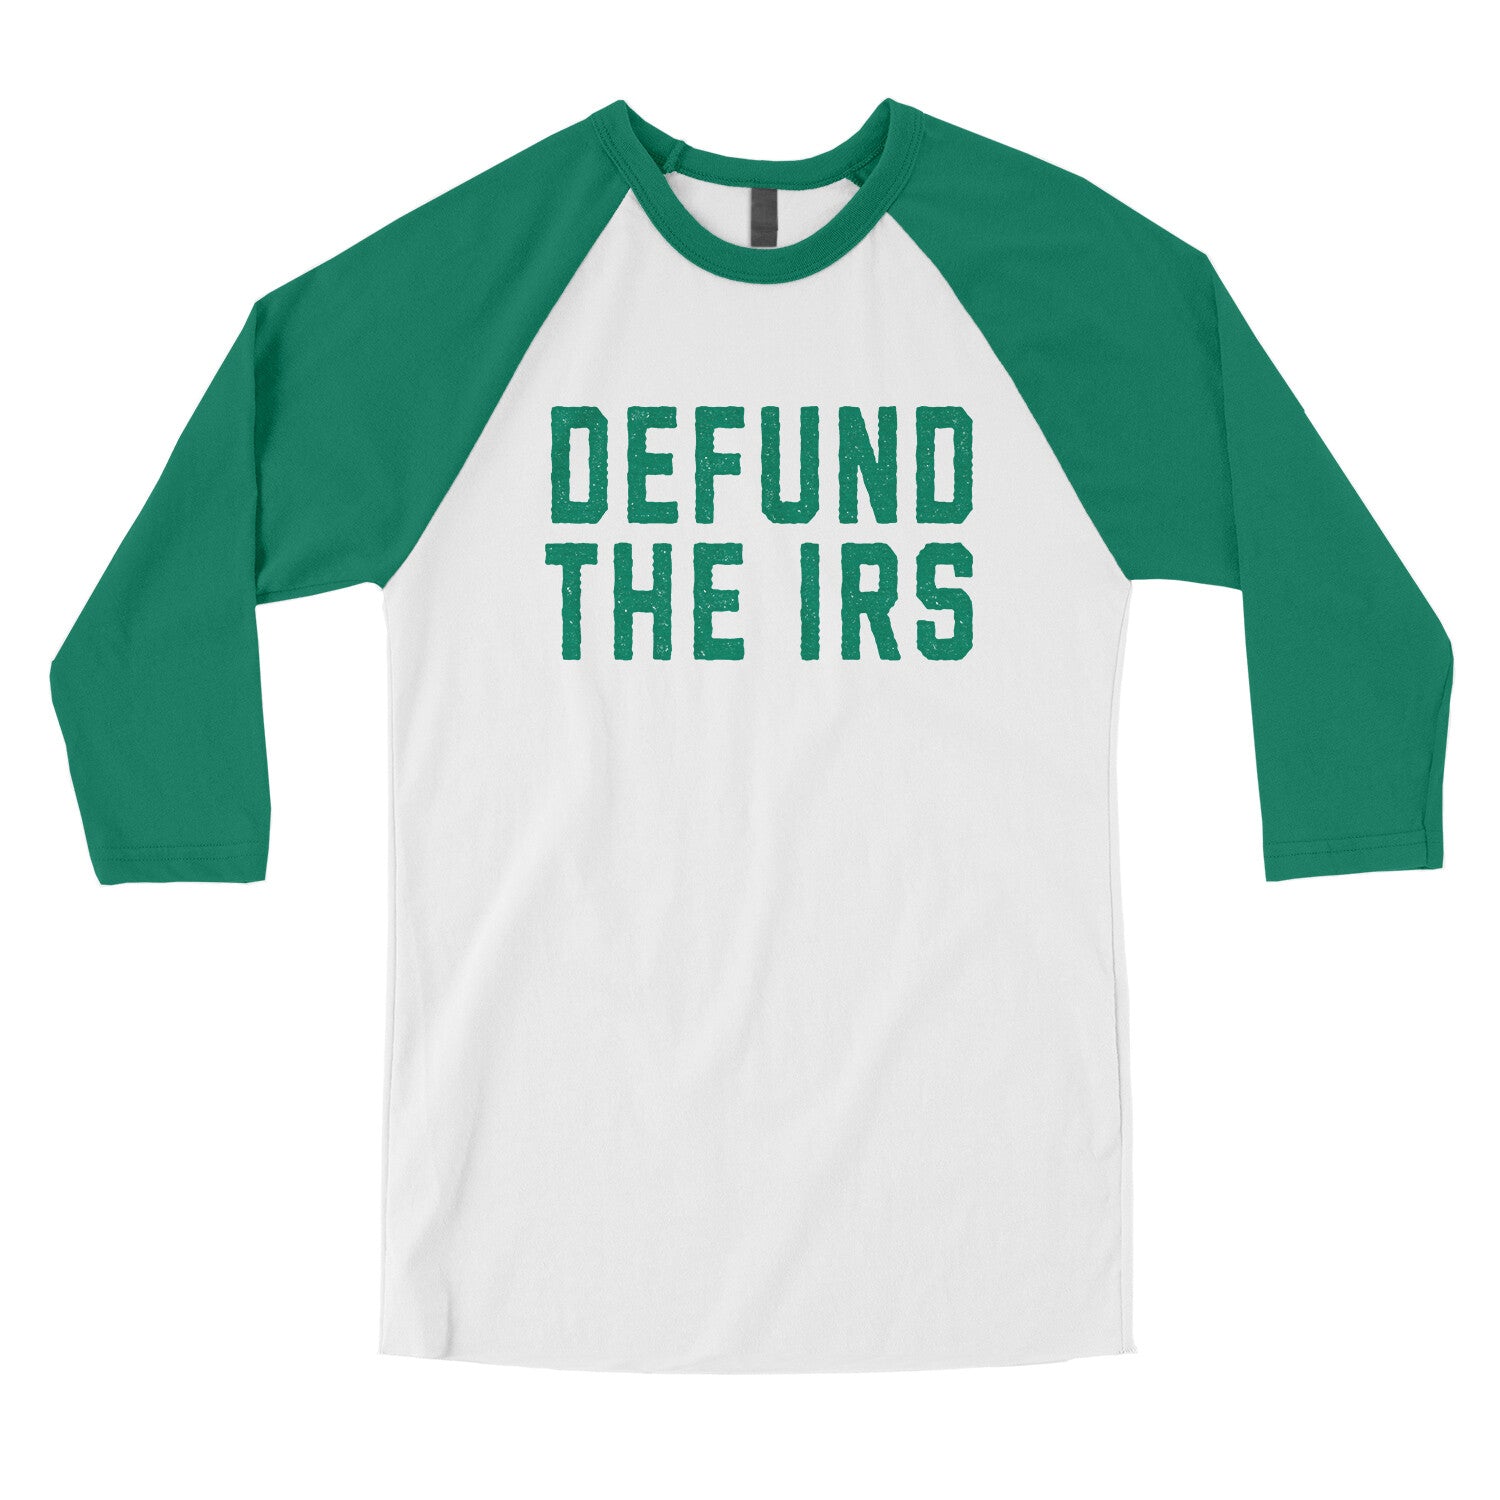 Defund the IRS in White with Kelly Color